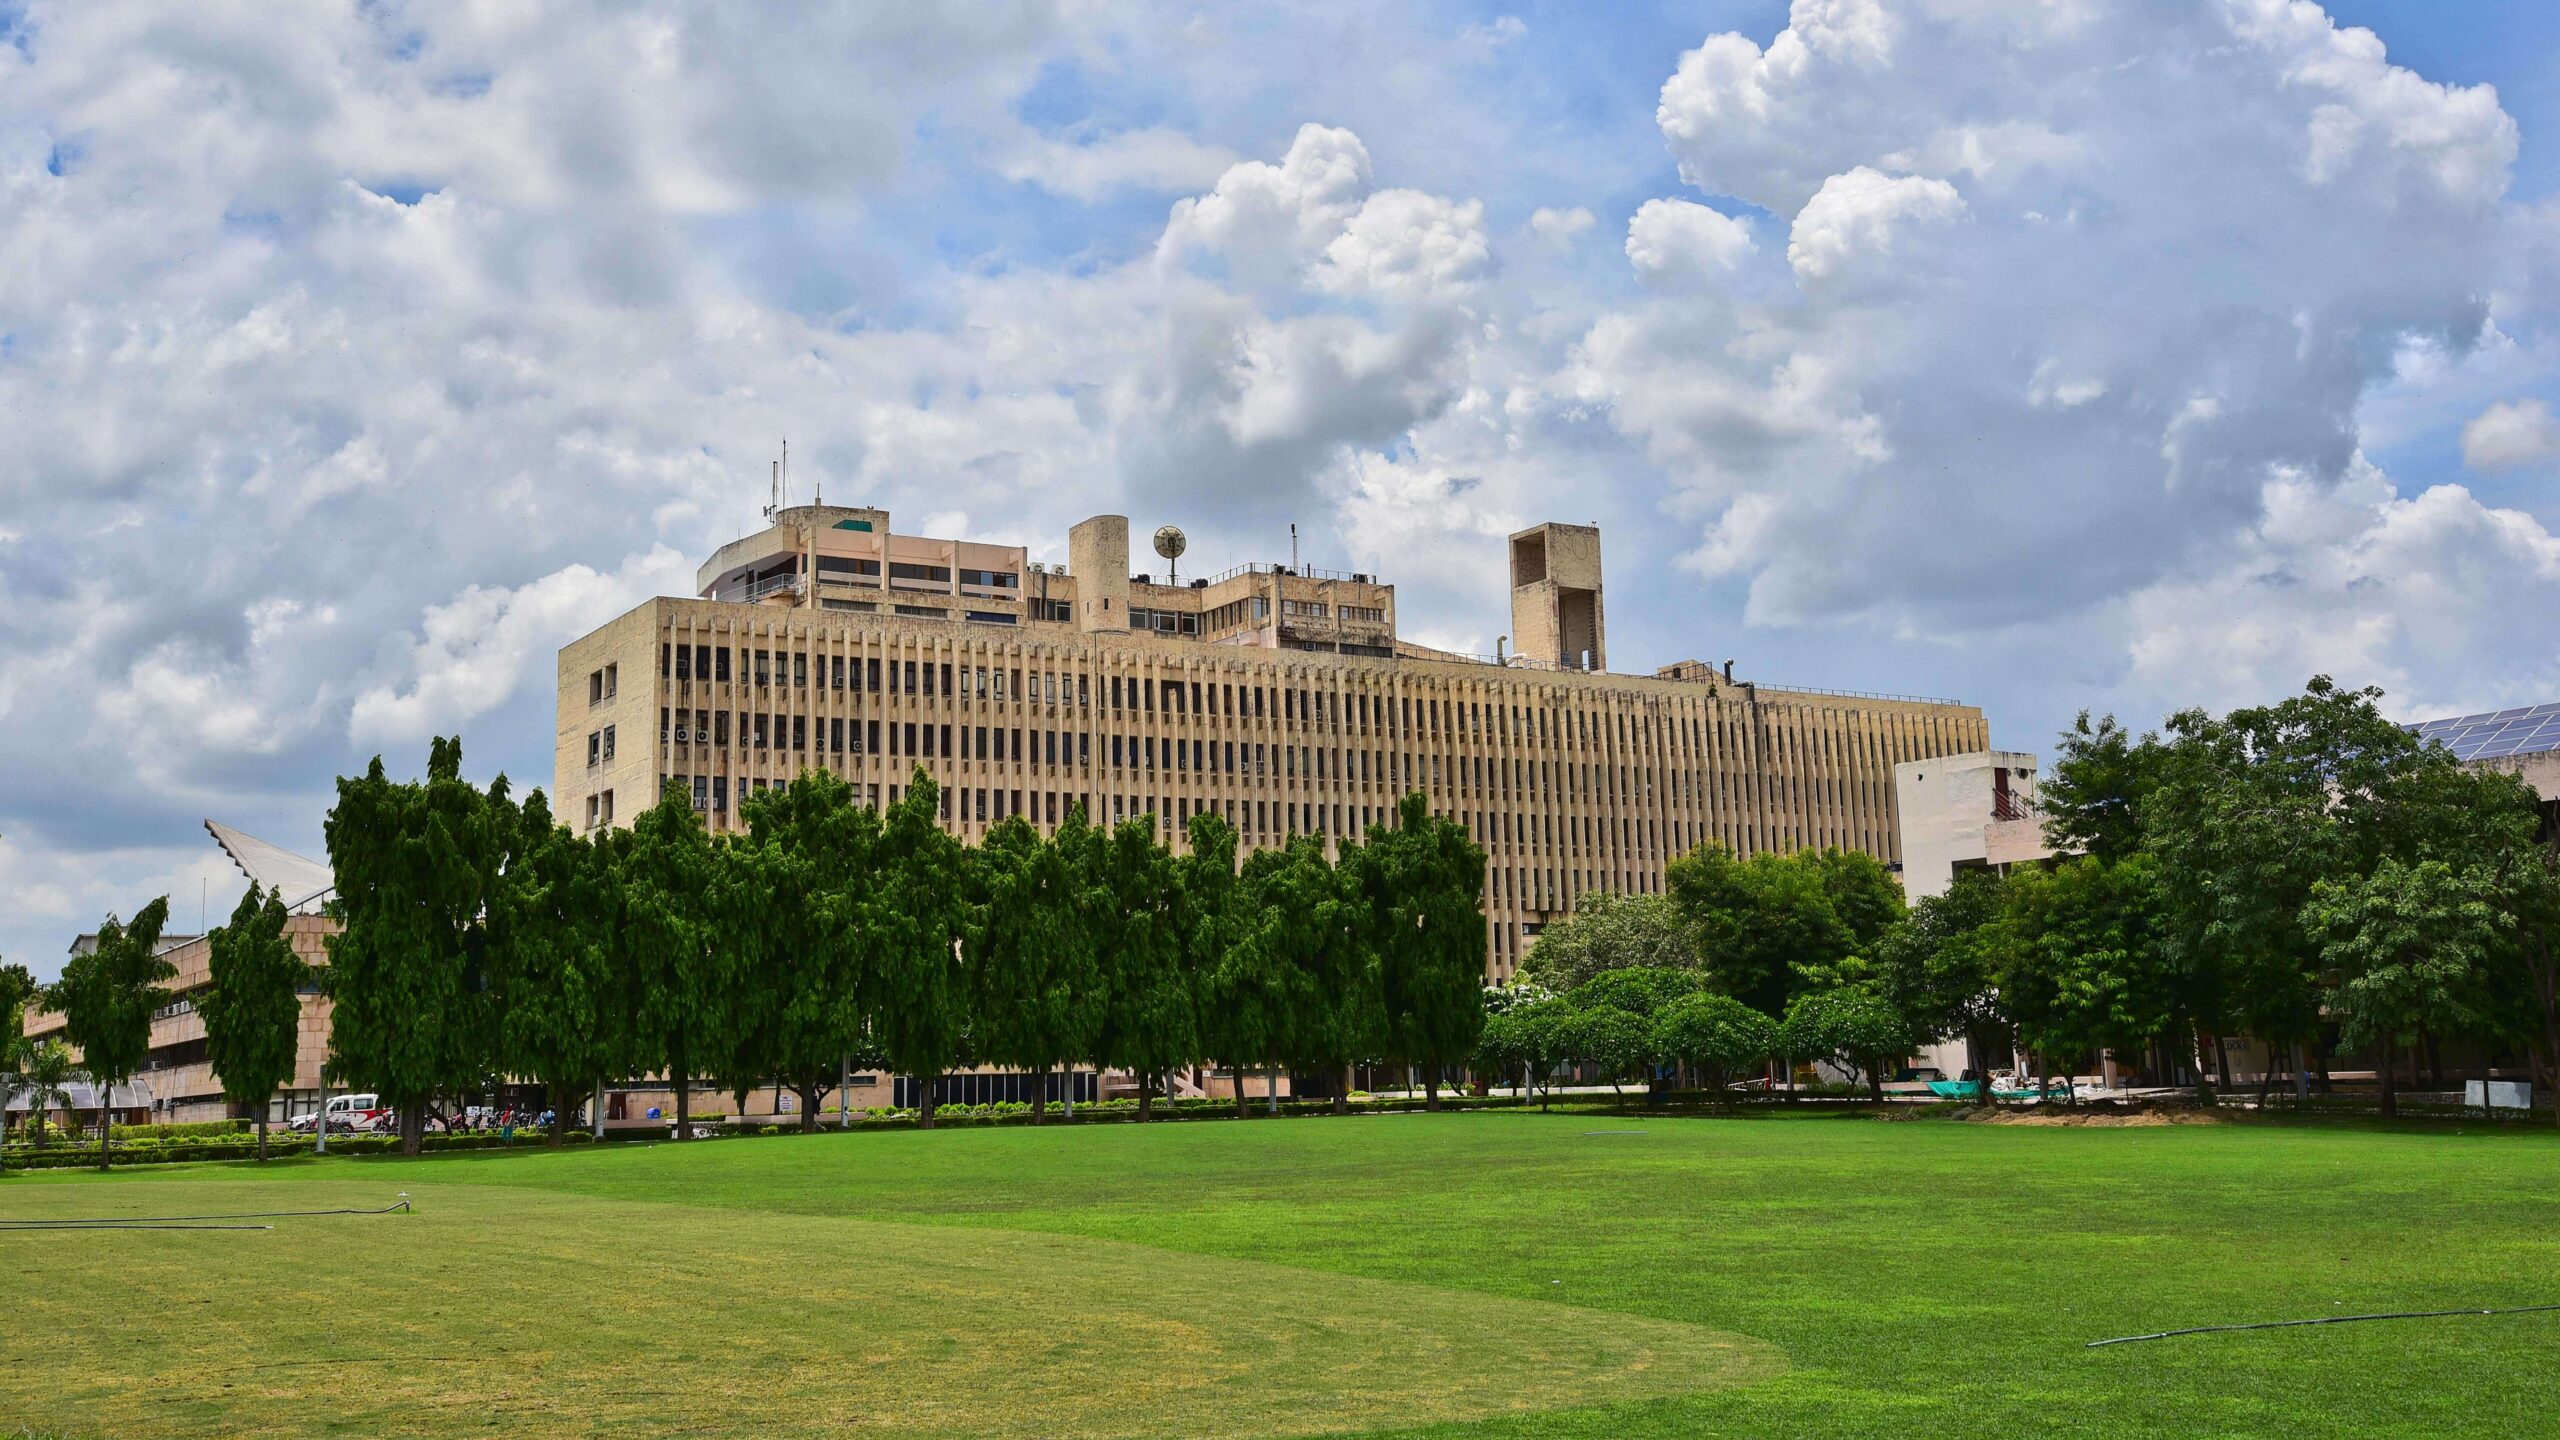 IIT Delhi's Abu Dhabi campus is a shared vision of two nations